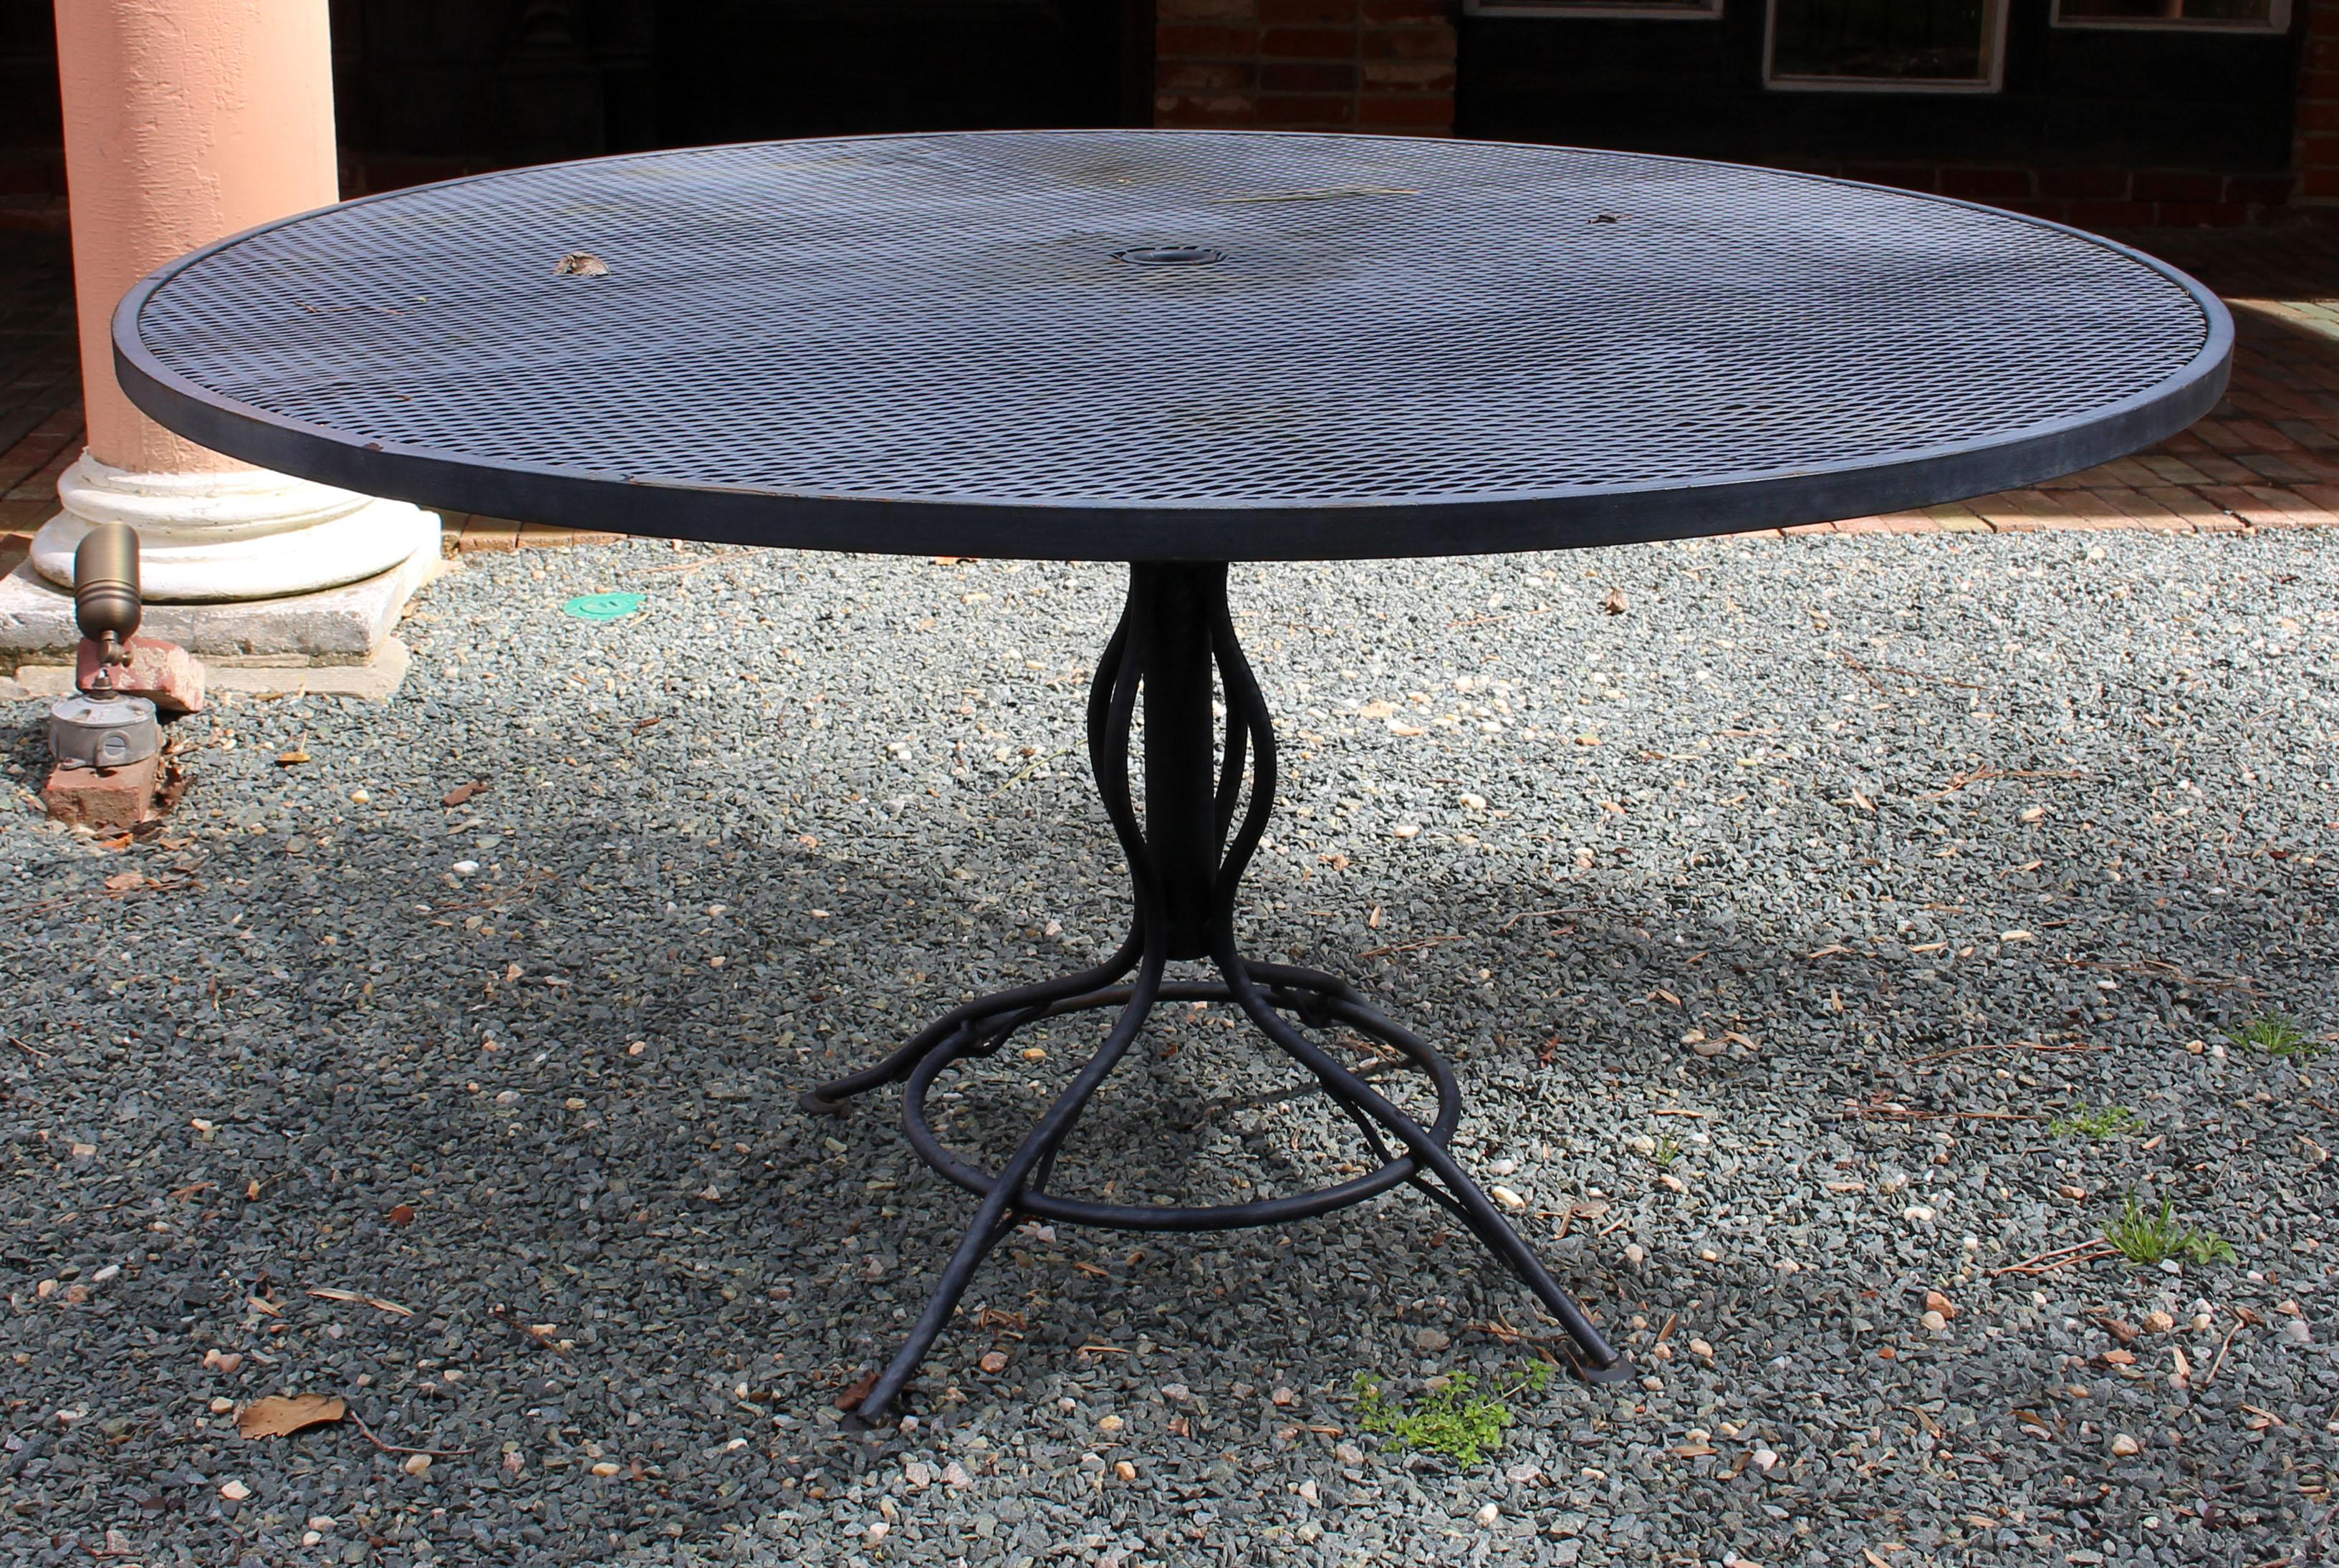 Vintage Woodard outdoor table & 4 barrel back chairs, Briarwood pattern, not labeled. Two spring chairs & two standard chairs. Large, stable umbrella stand table with scrolled iron supports around the umbrella holder. Weathered patina.
Table: 53.5